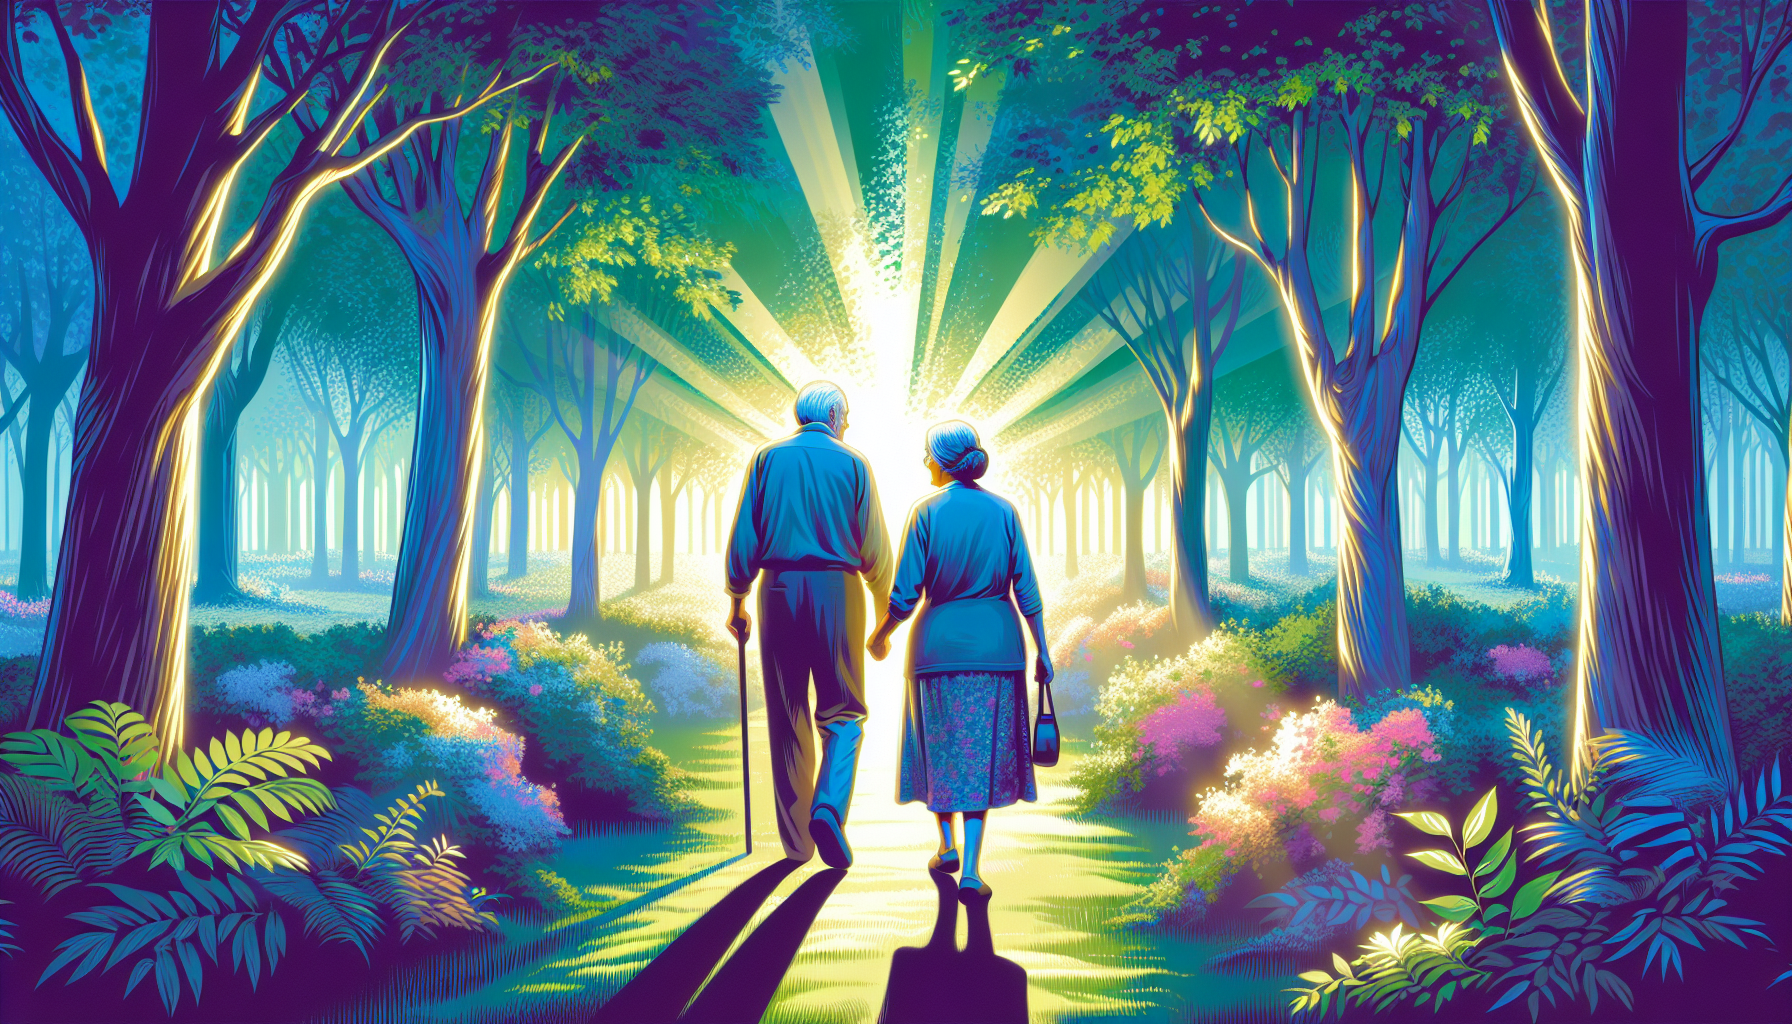 An elderly couple walking hand-in-hand through a beautiful, tranquil garden, with soft sunlight filtering through the trees, reflecting a serene and loving atmosphere.